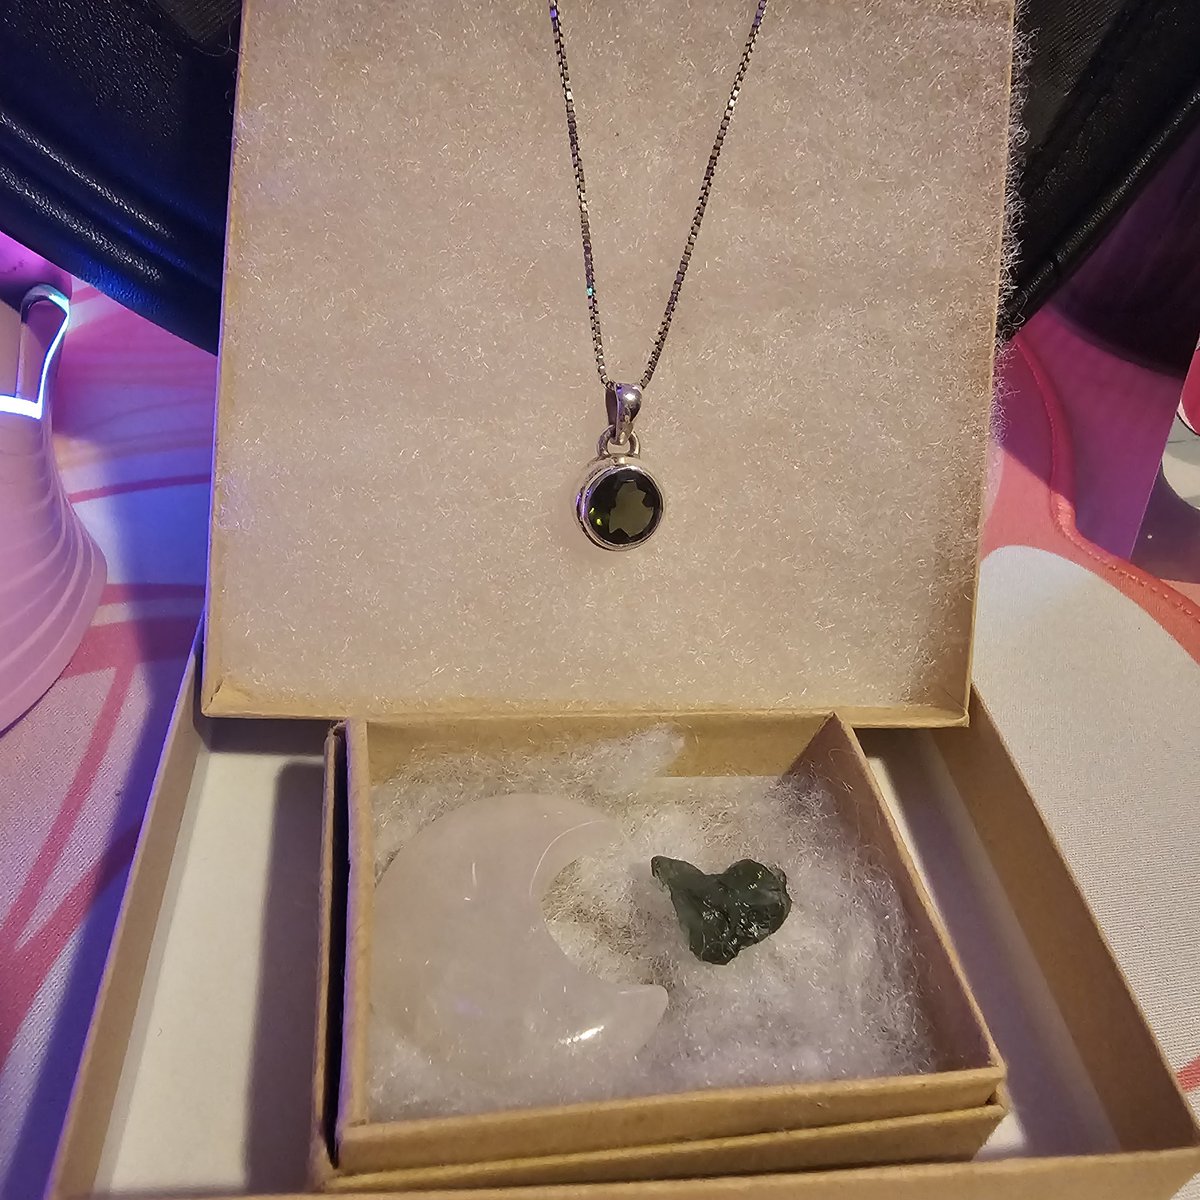 A little gift to myself. More moldavite to add to my collection. And they gave me a Rose quartz moon which I adore!